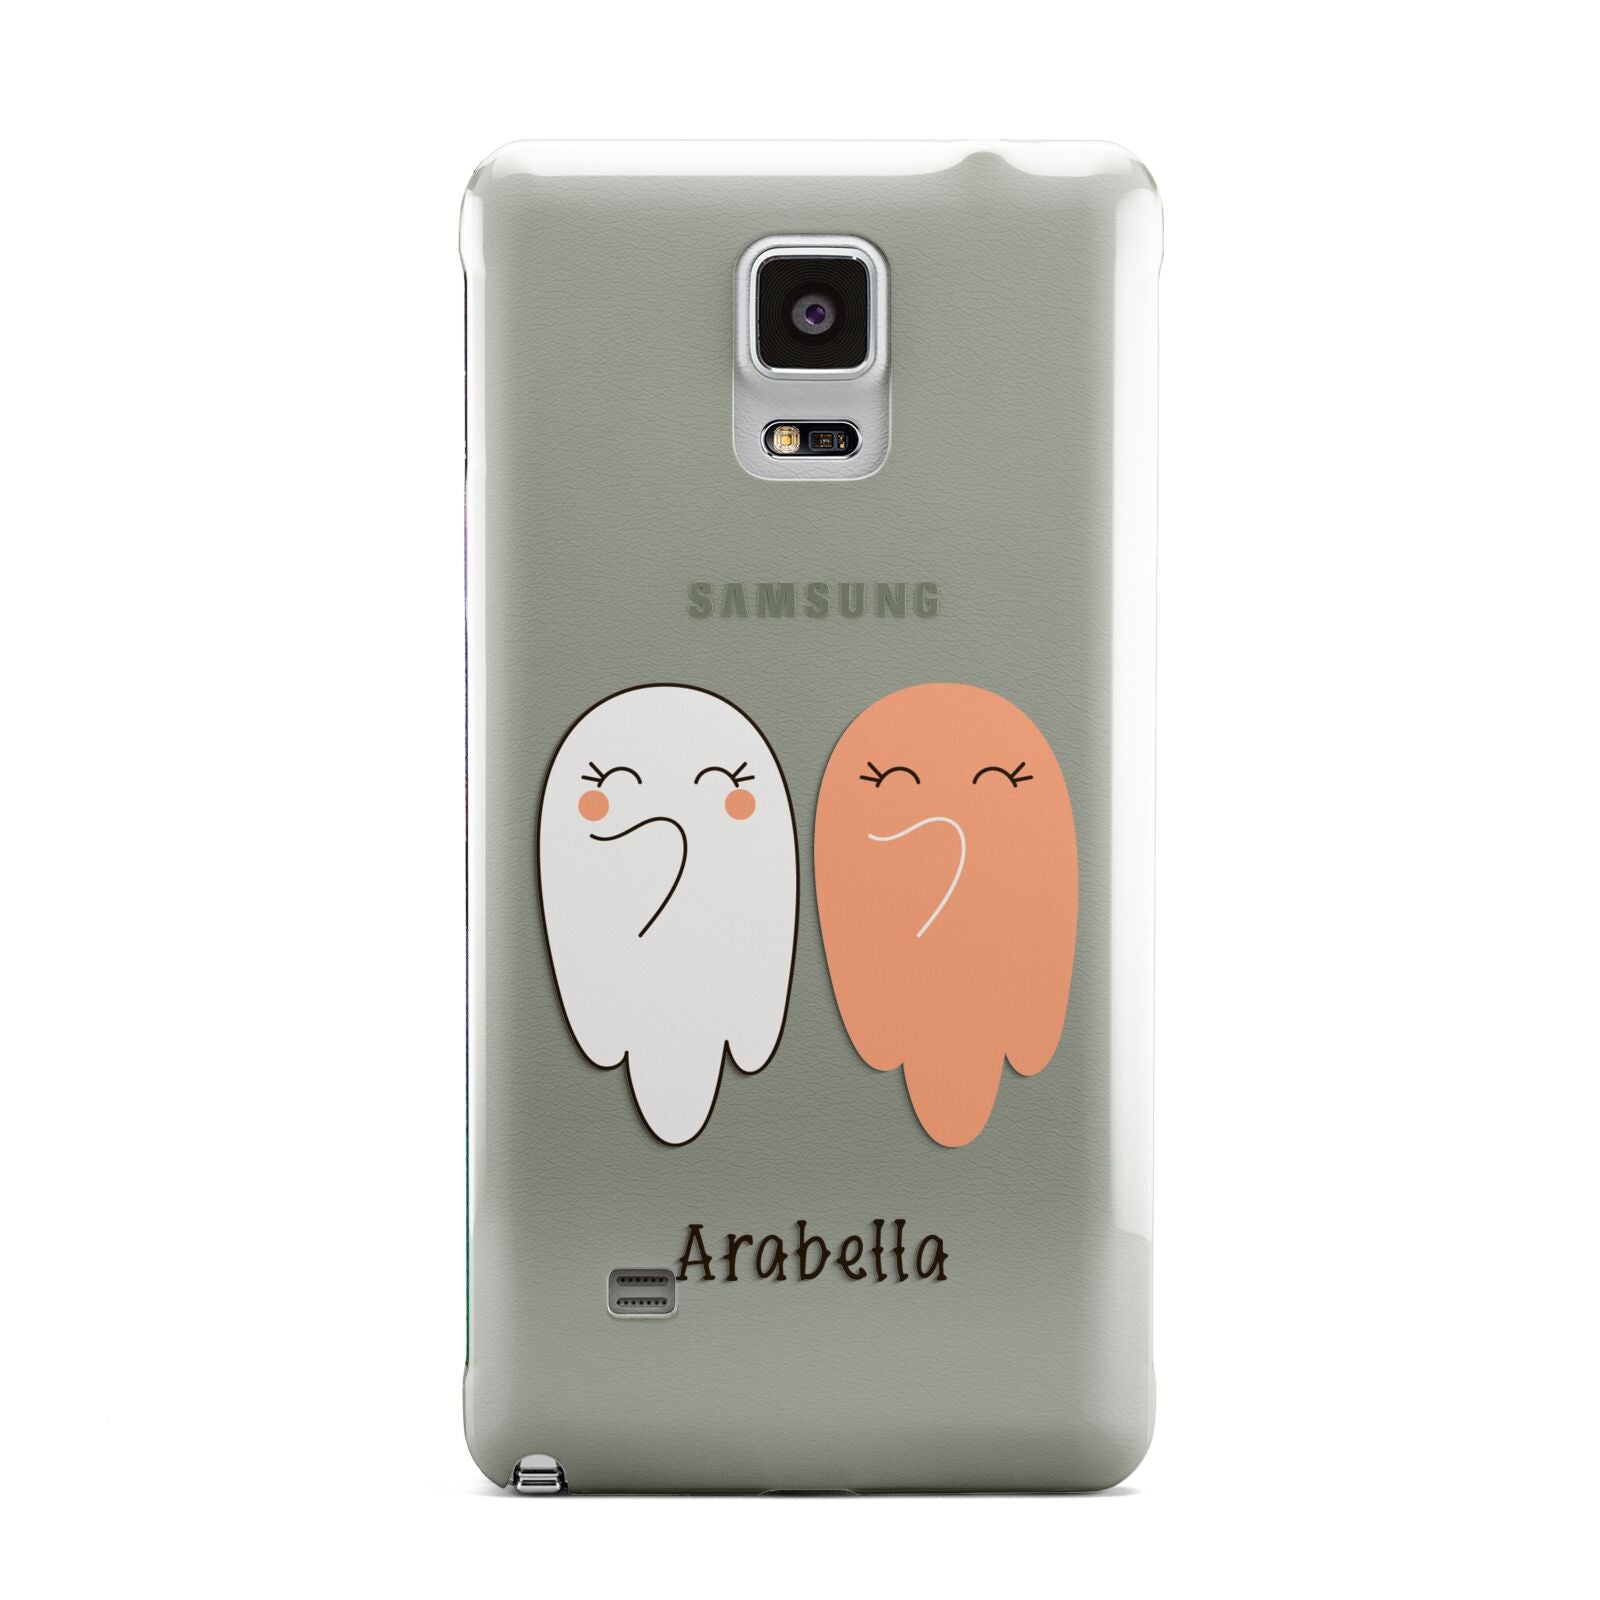 Two Ghosts Samsung Galaxy Note 4 Case